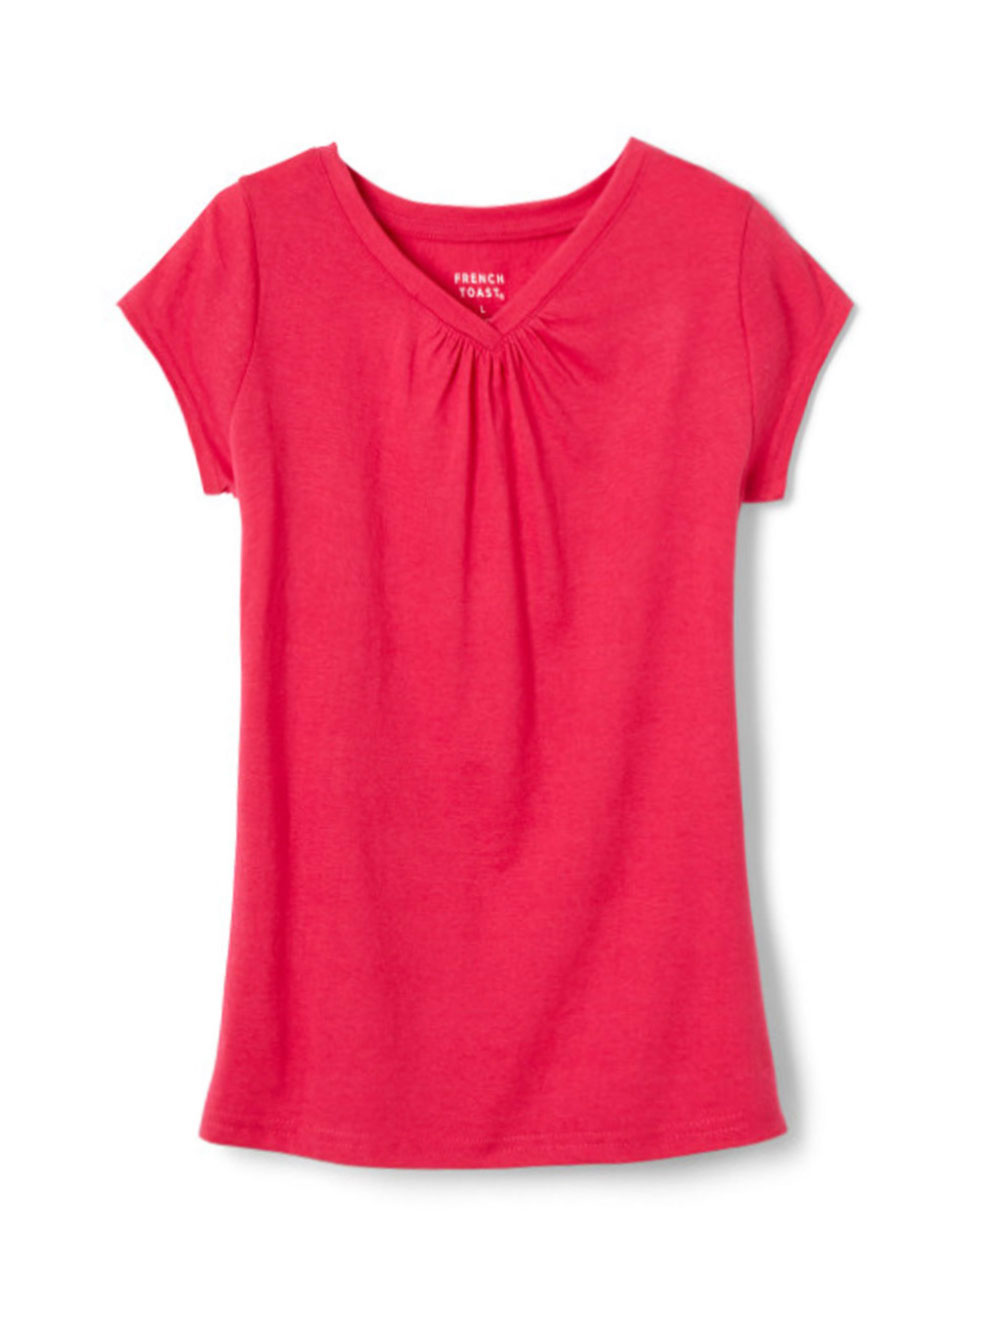 Size 8 T-Shirts for Girls